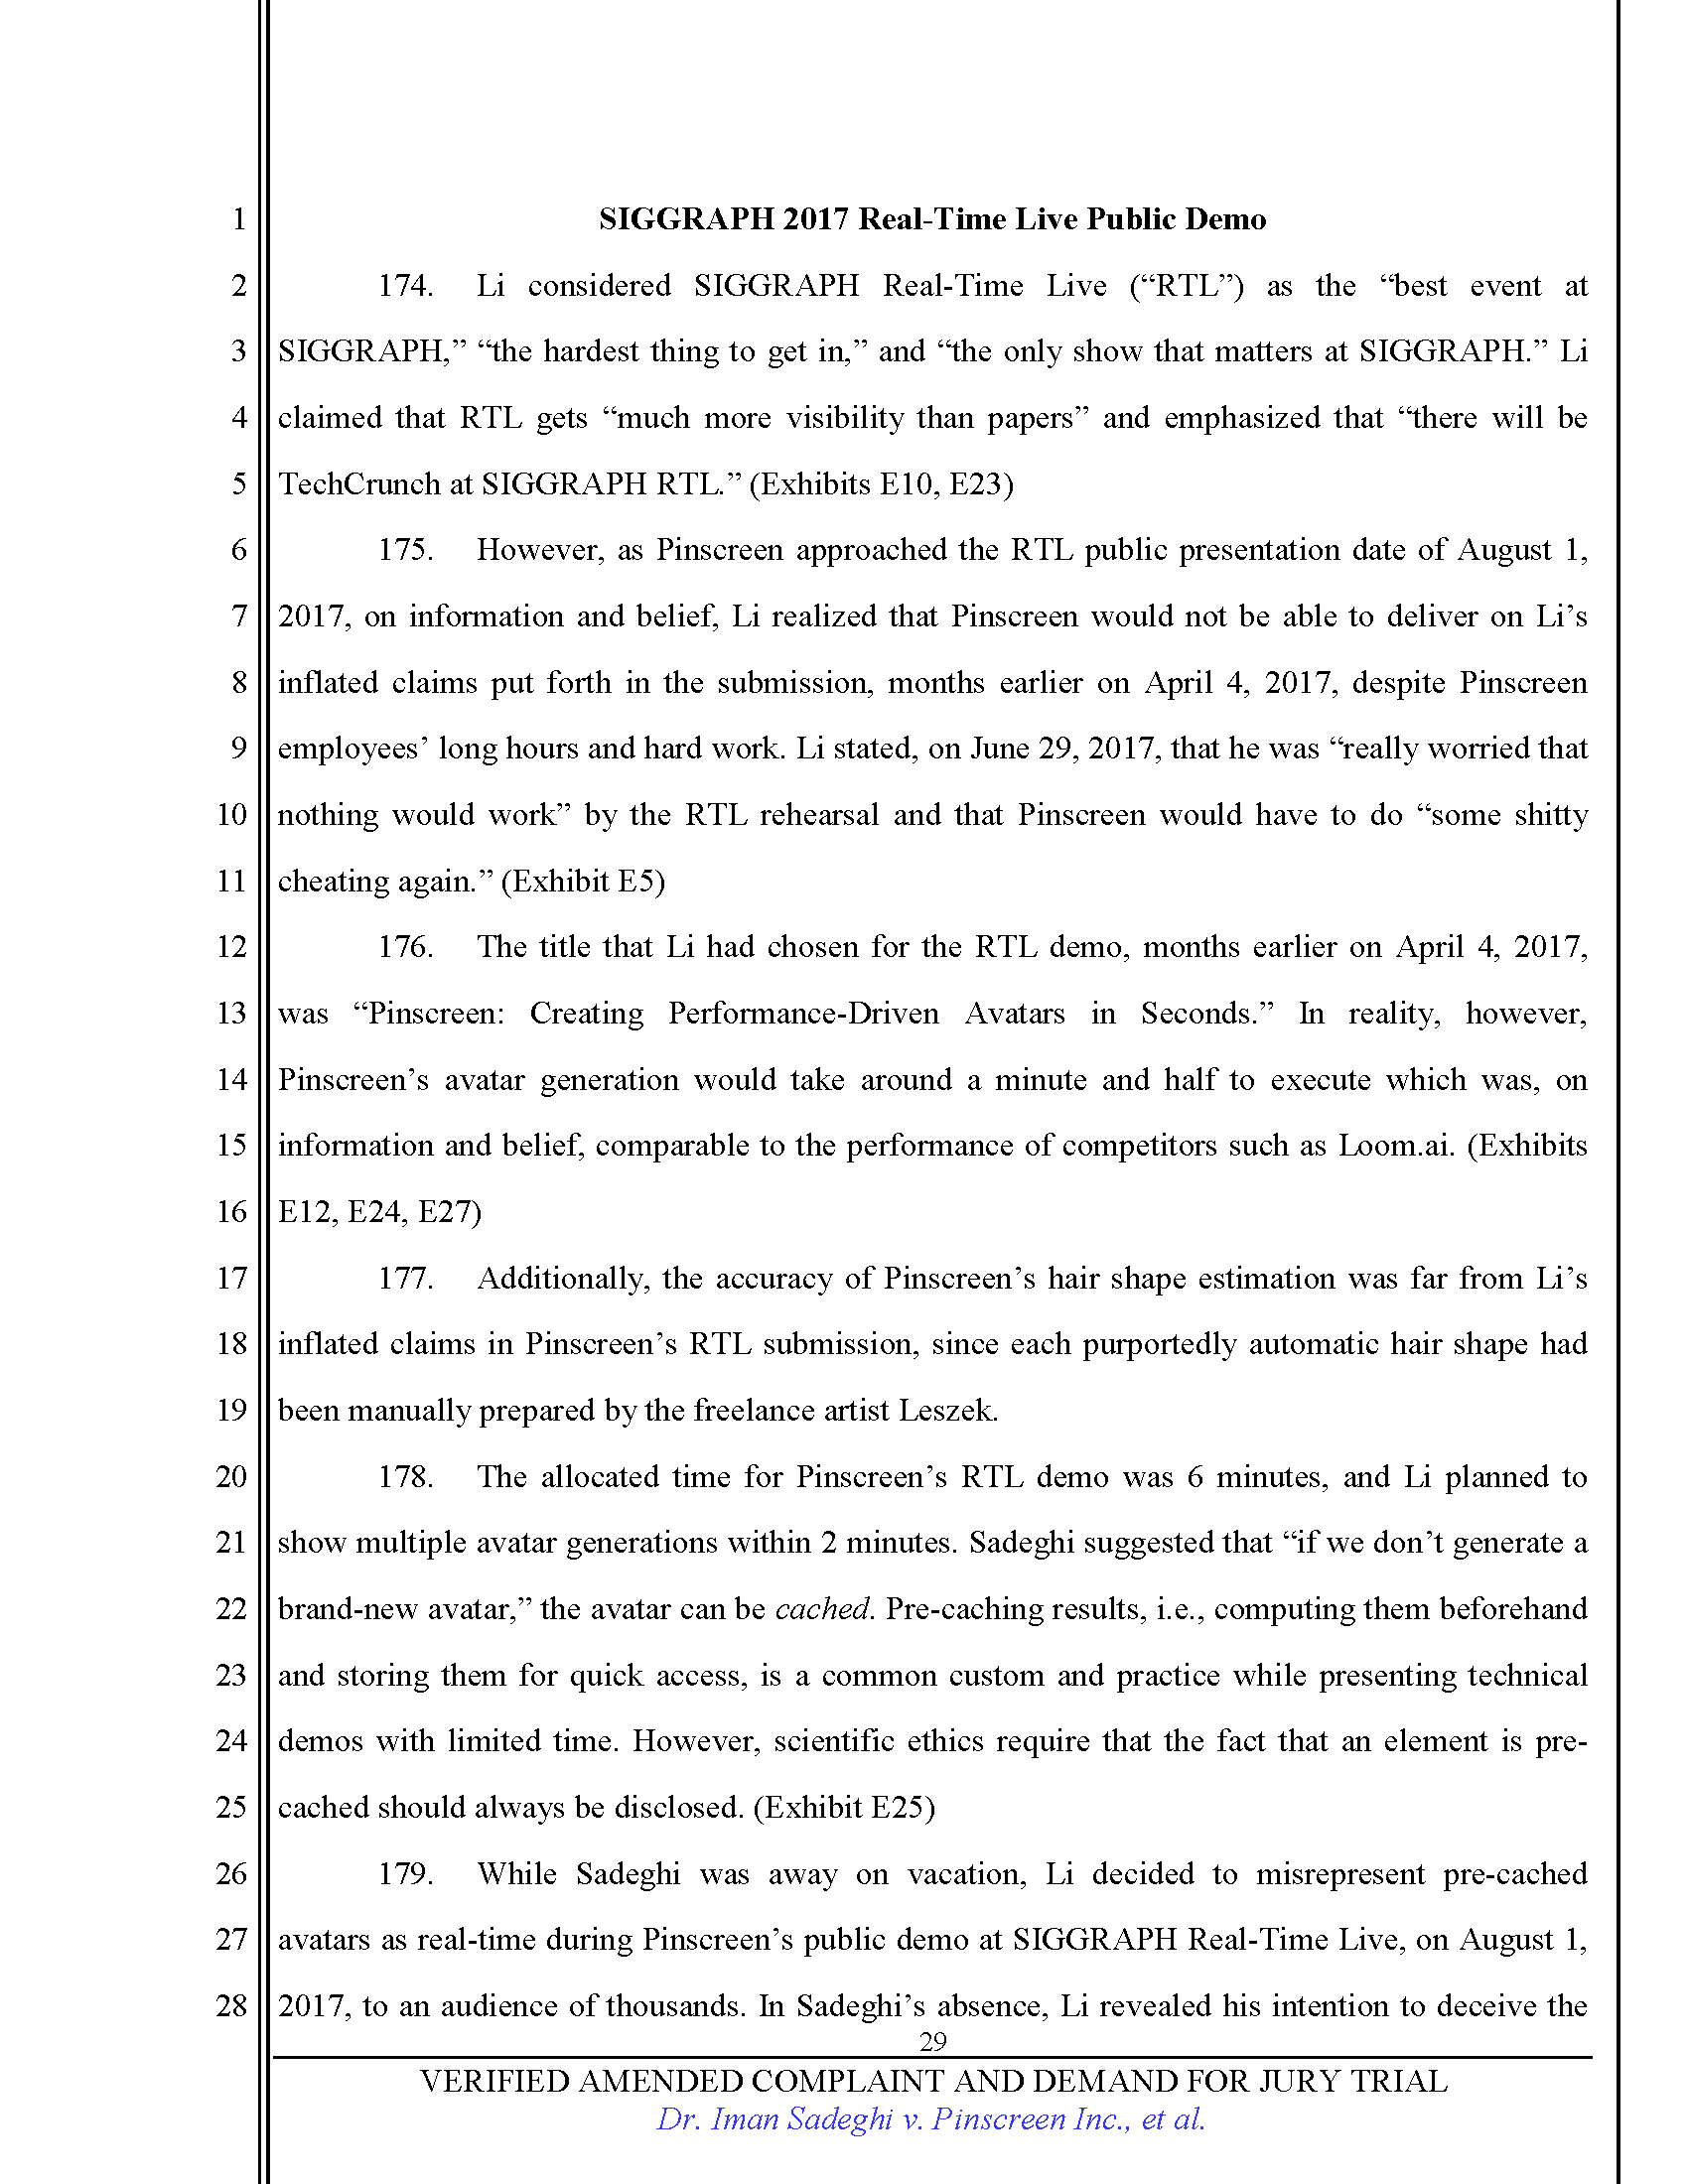 First Amended Complaint (FAC) Page 29